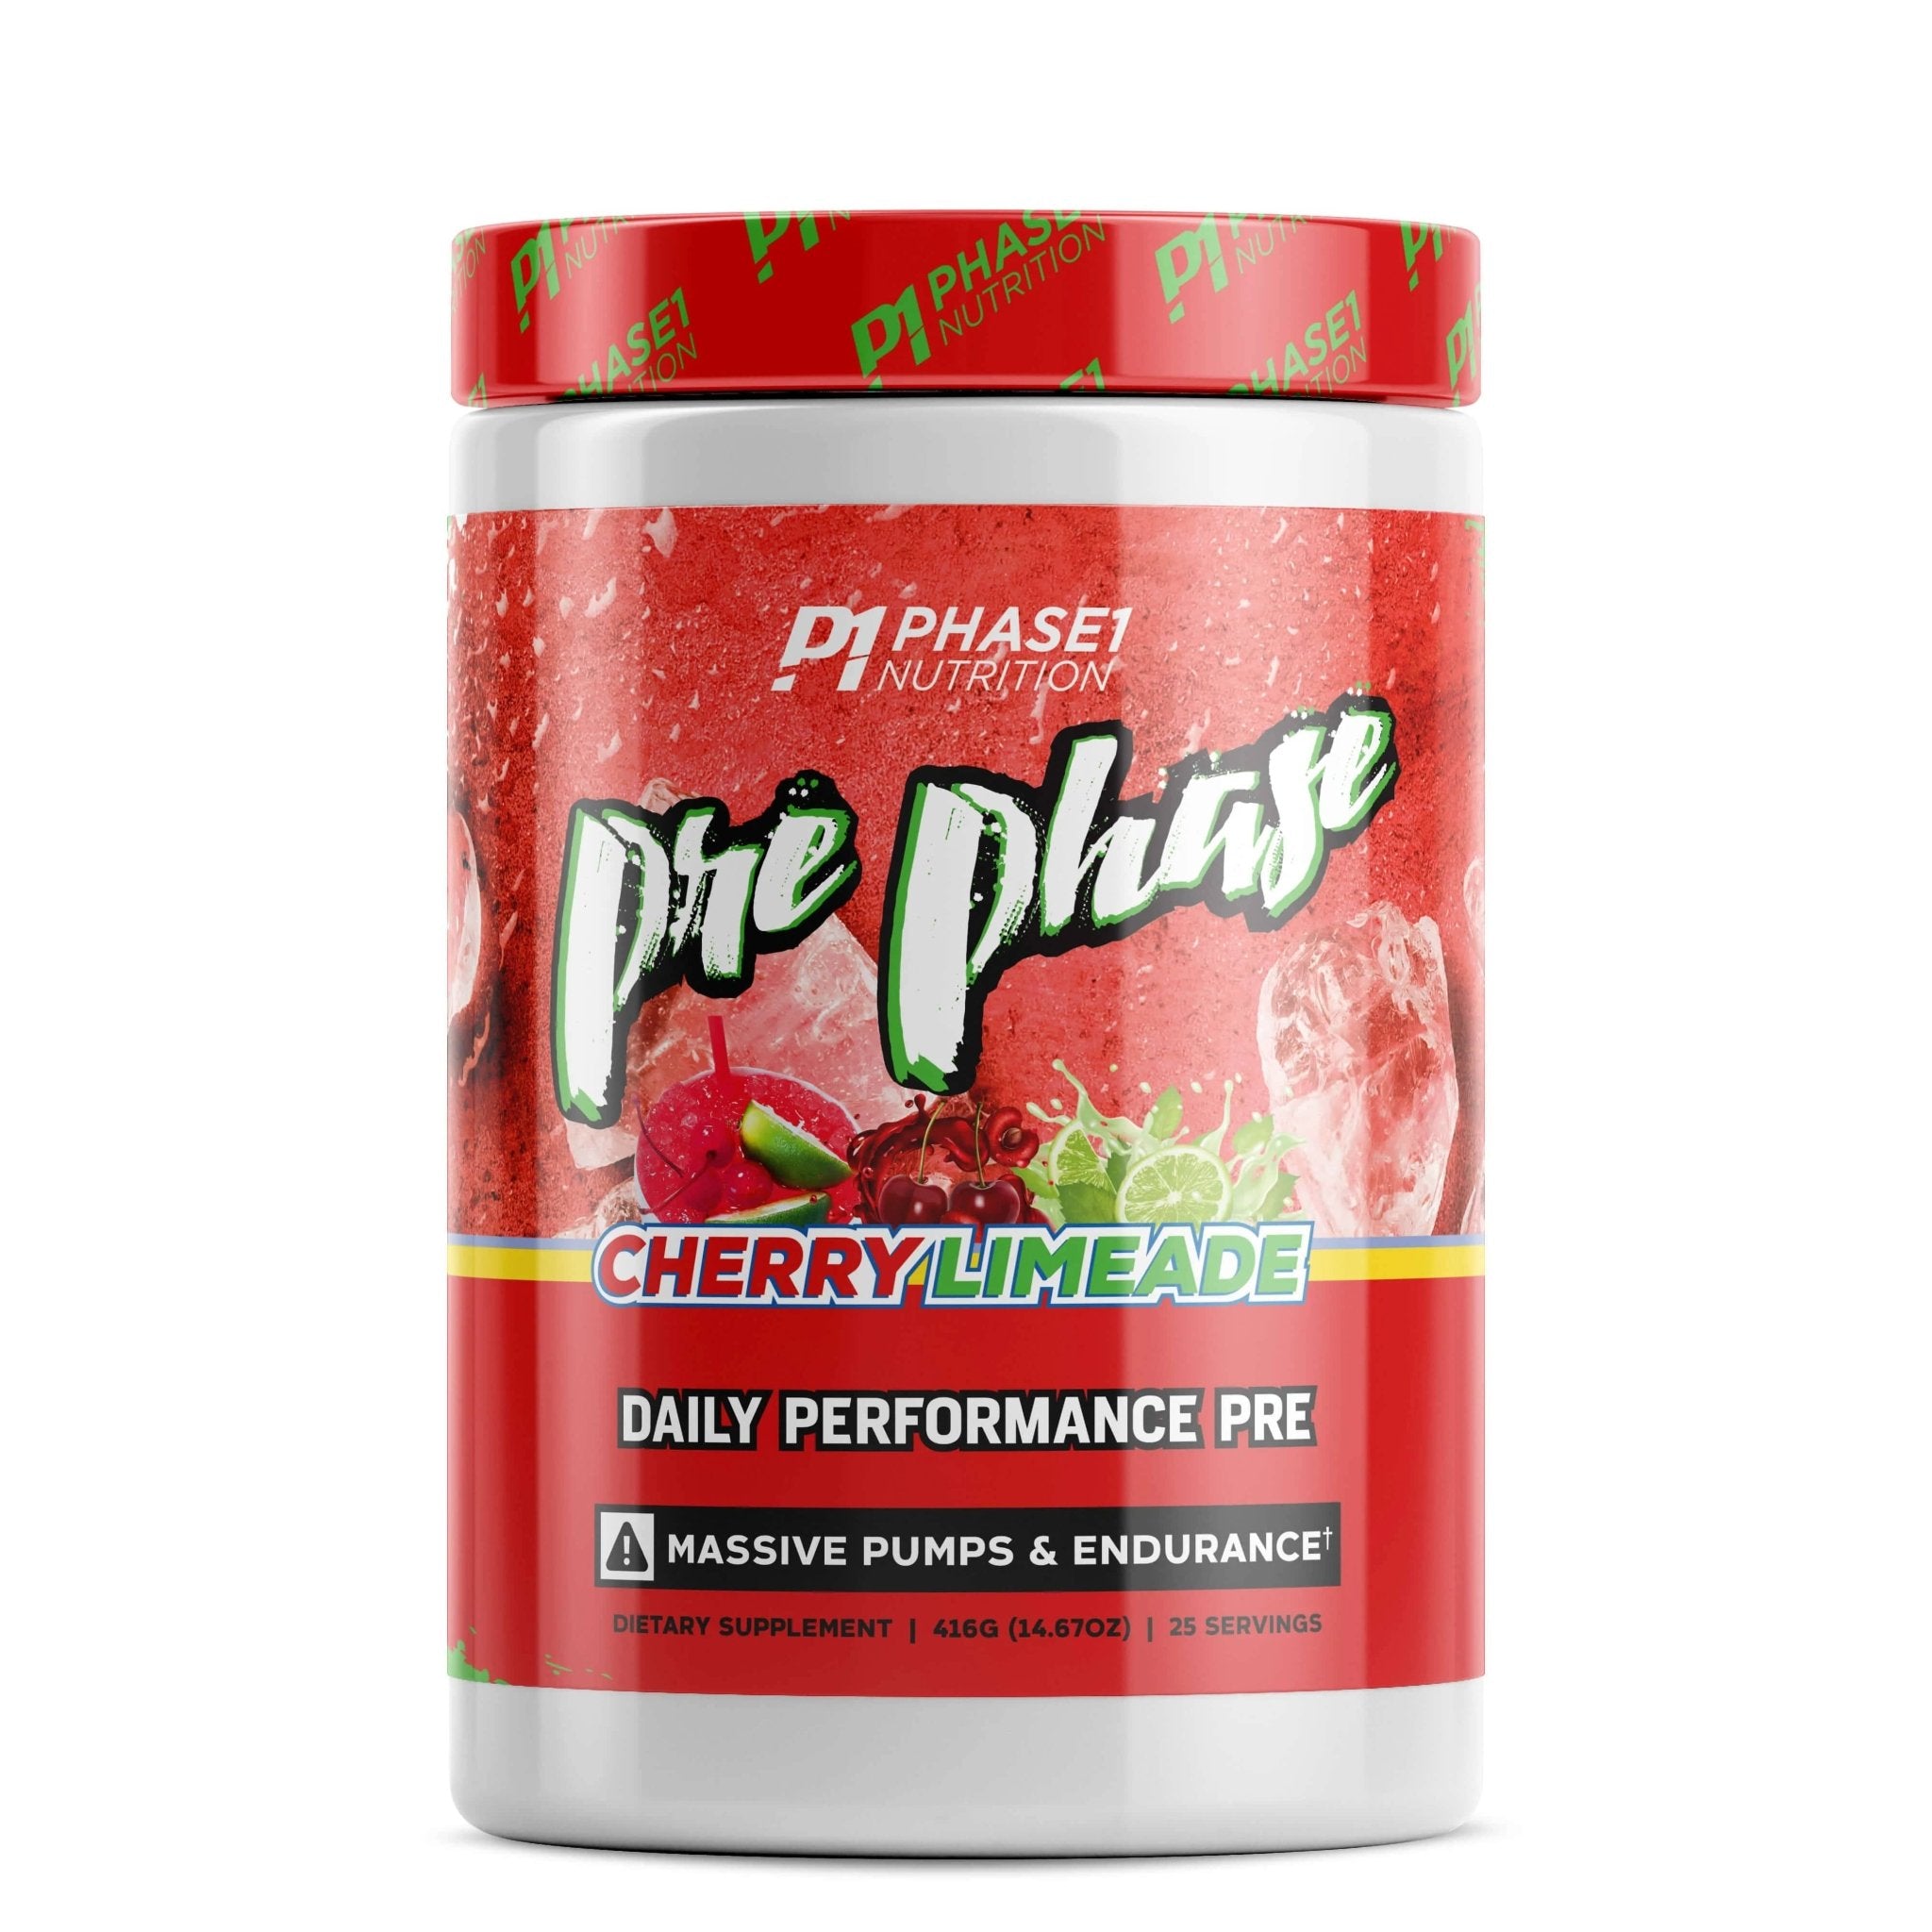 Phase One NutritionPre Phase®Pre-WorkoutRED SUPPS